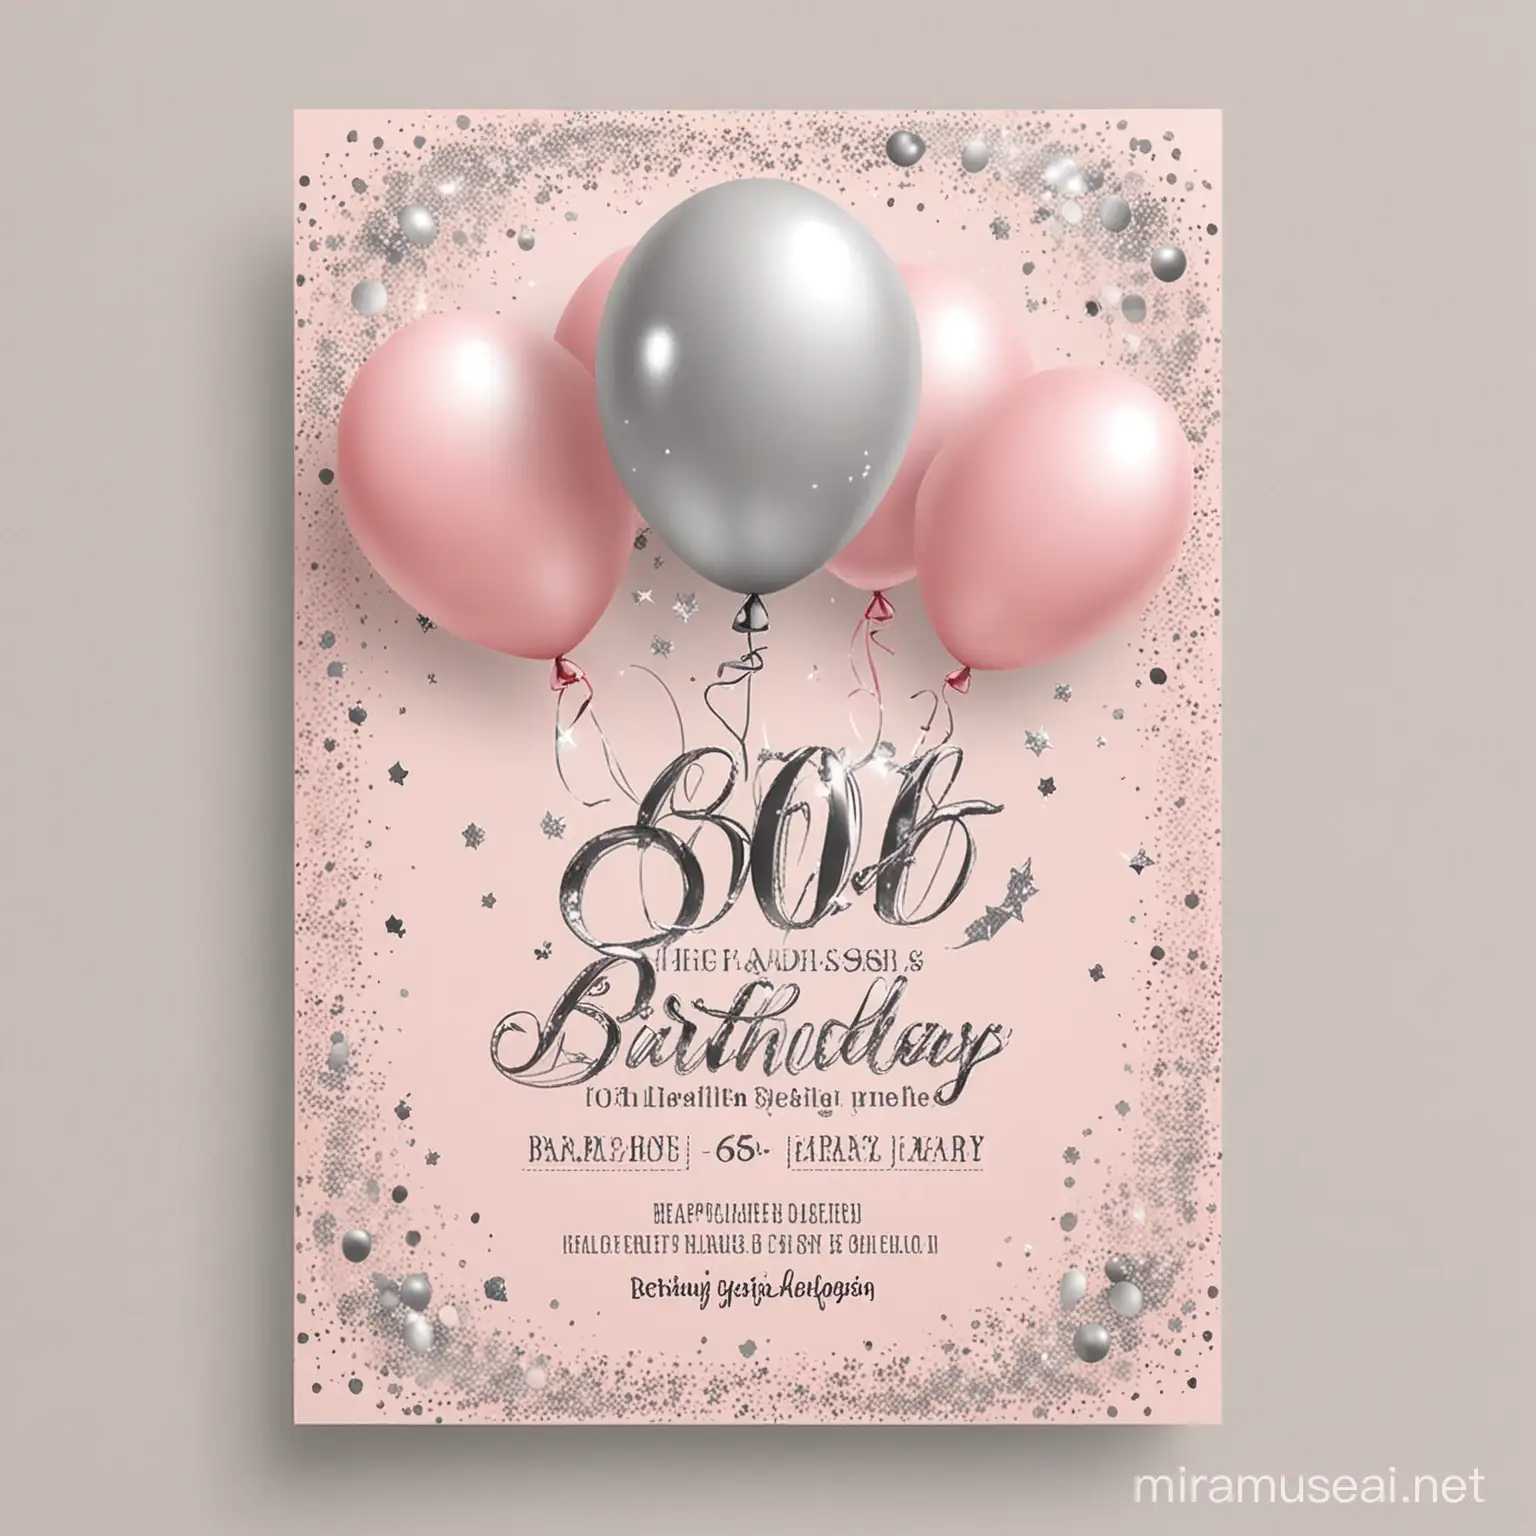 4x6 size with glitters soft pink and silver color palette Elegant 60th Birthday Flyer Design with balloons and designs